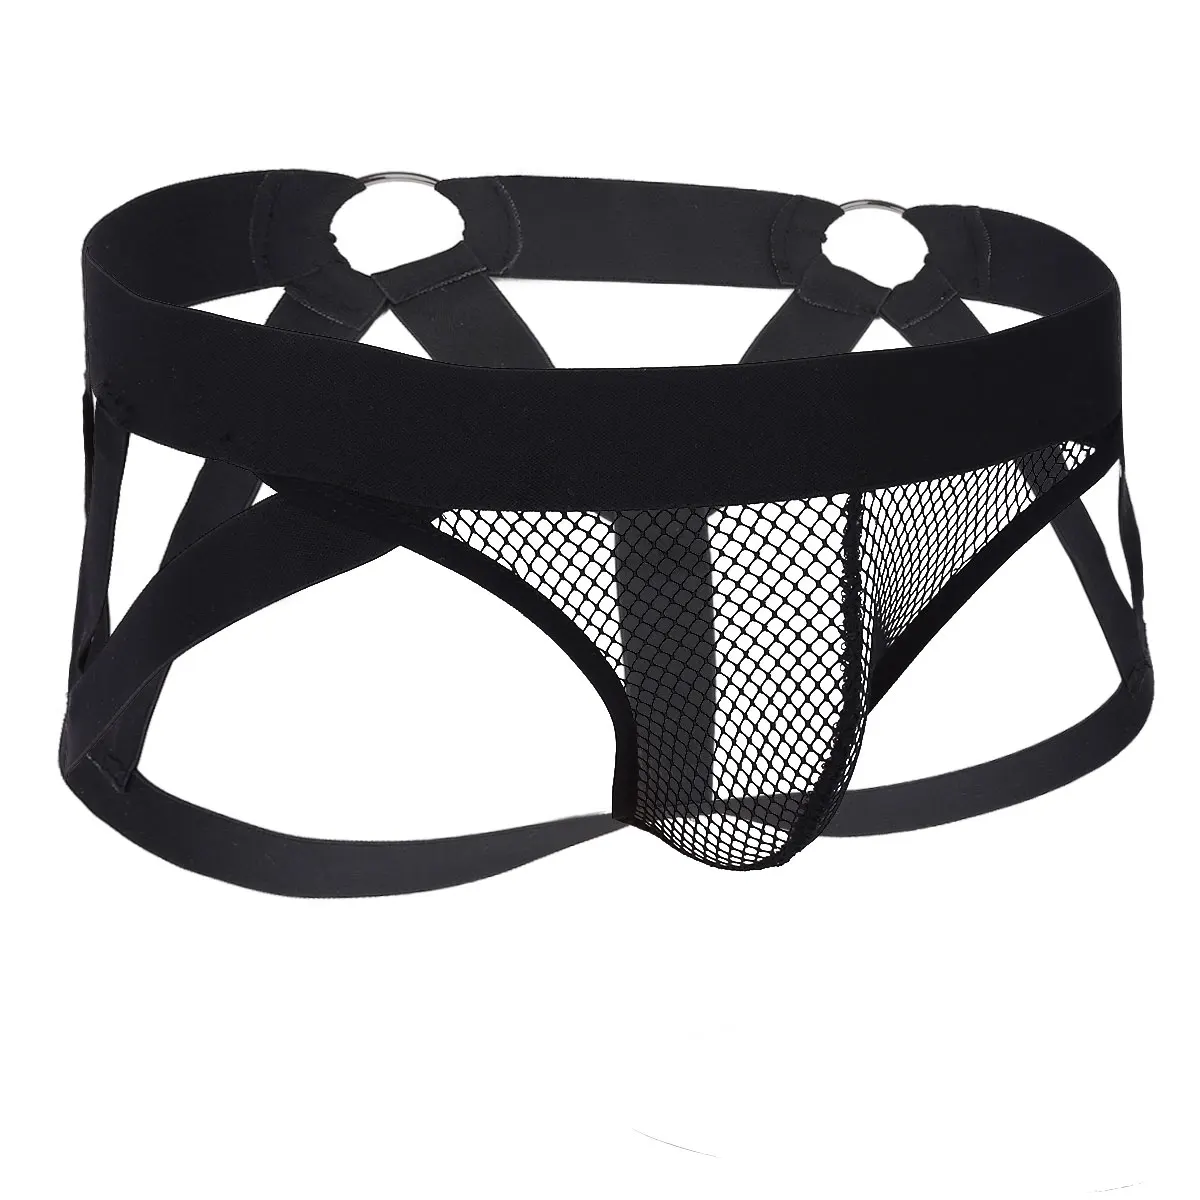 See Through Men Boxers Fishnet Open Back Hollow Out Strappy Jockstrap G ...